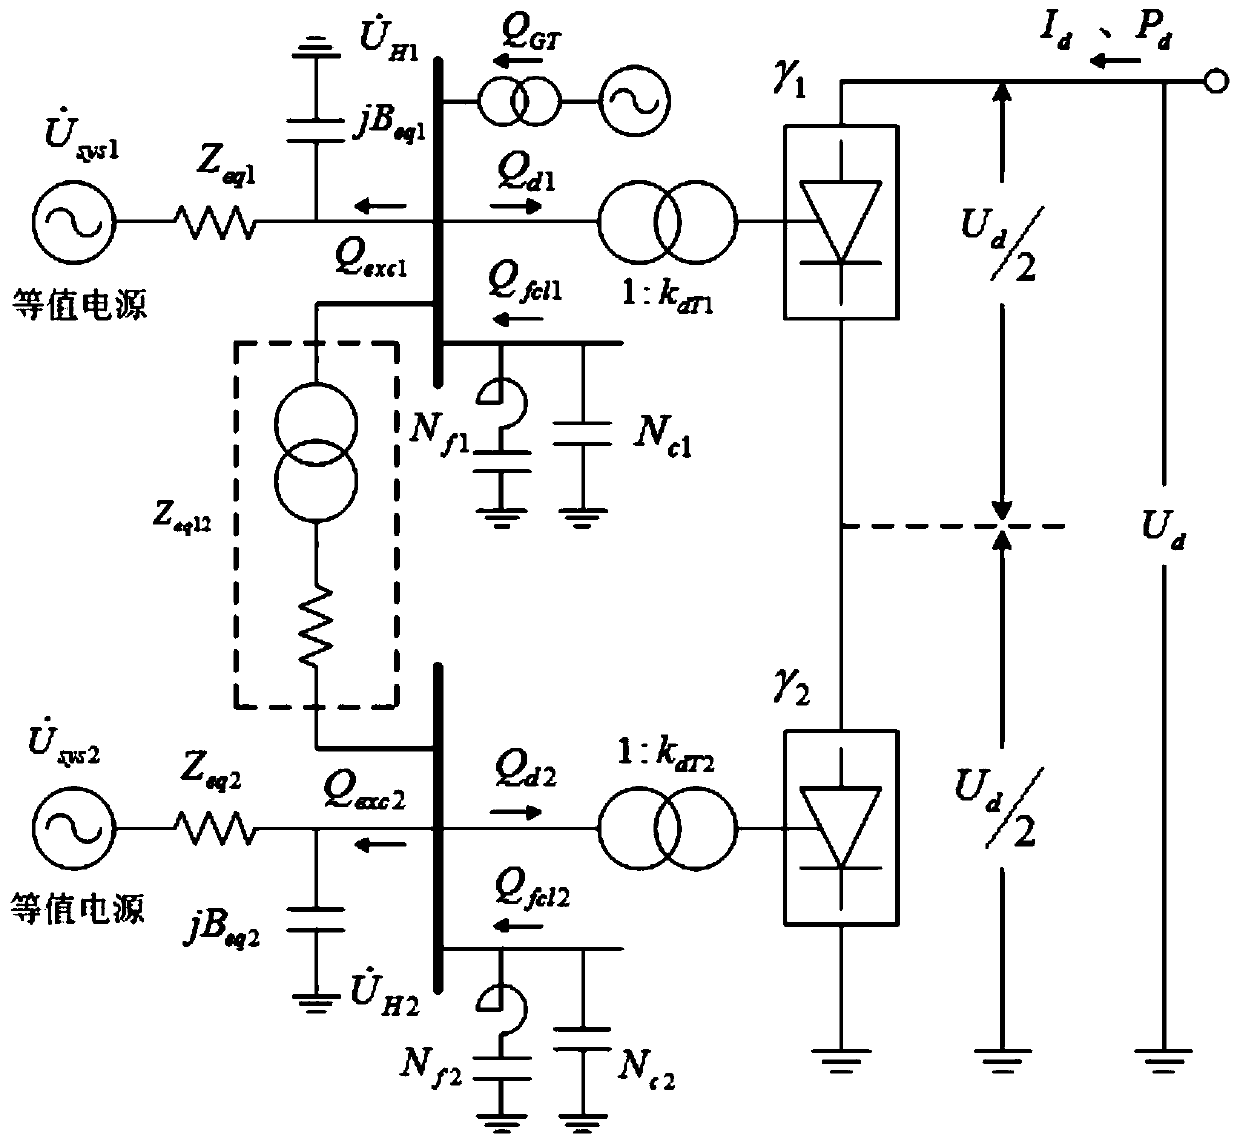 Coordinated dynamic reactive power optimization method for phase modifier and hierarchical structure UHV DC receiving end converter station